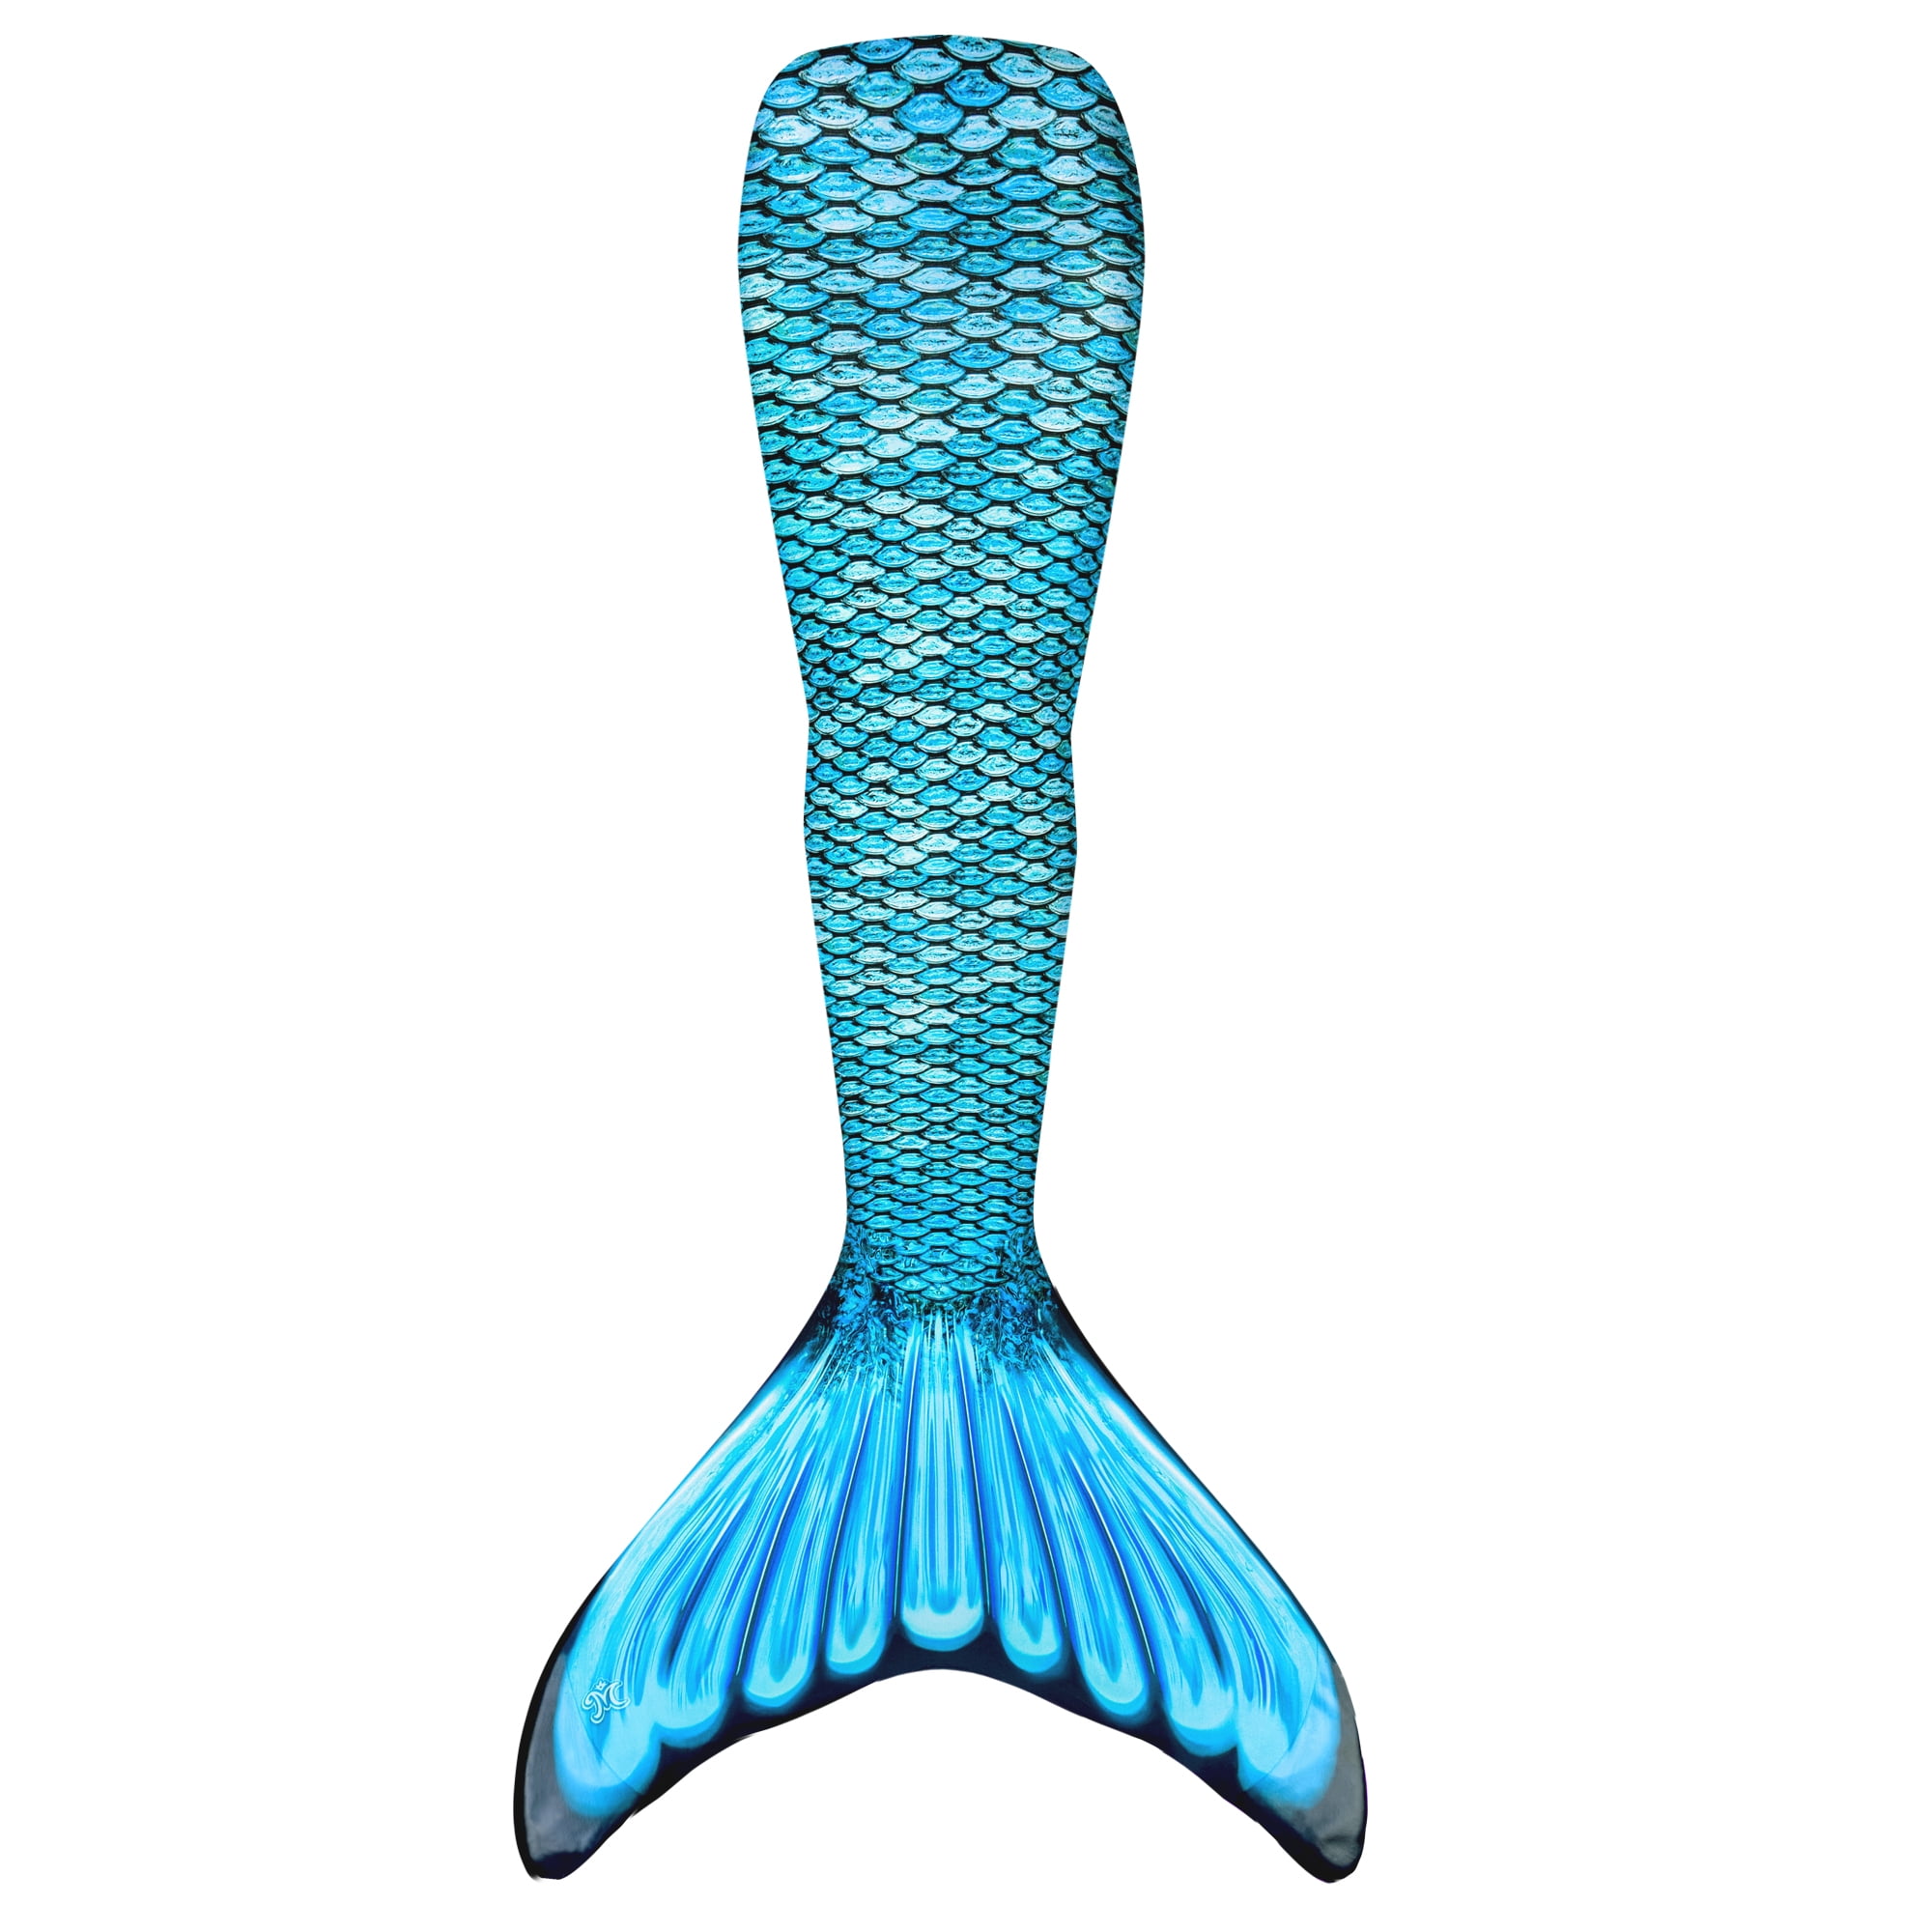 NO Monofin Boys Reinforced Tips for Girls Children and Adults Fin Fun Mermaid Tail Only 